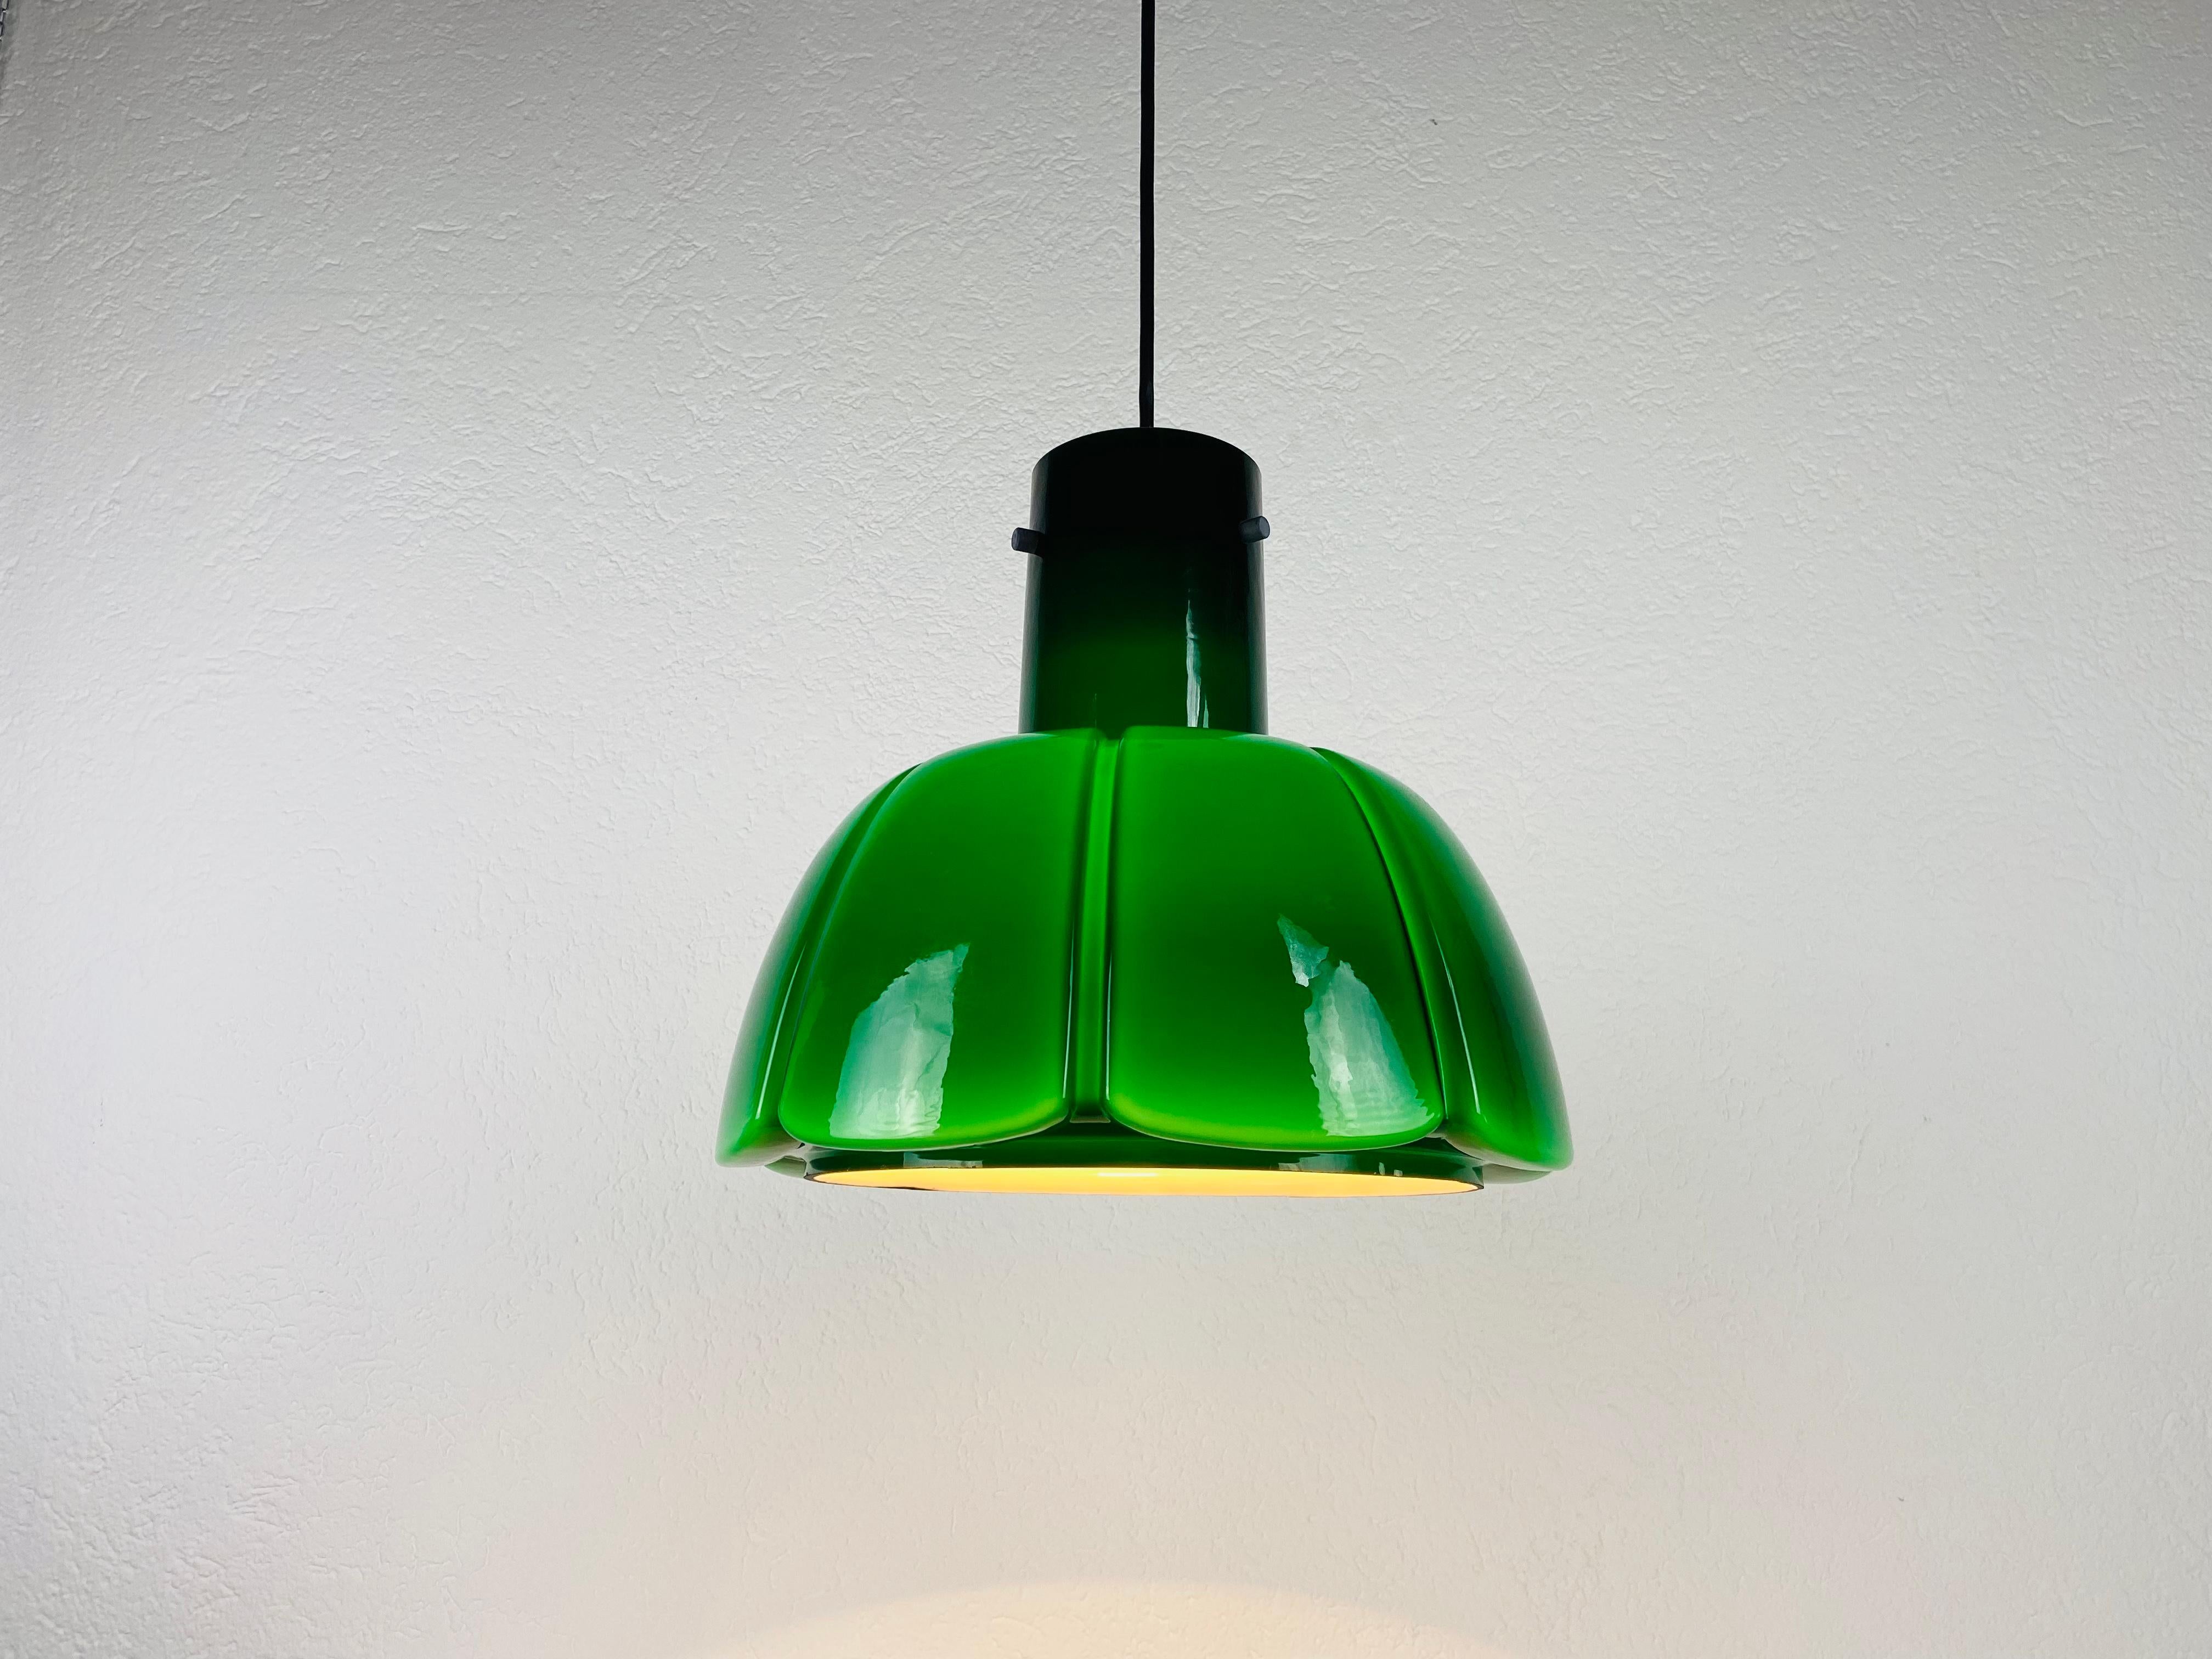 A Peill & Putzler hanging lamp made in Germany in the 1970s. It is fascinating with its glass ornaments. Textured green glass. The lamp has a beautiful organic shape.

The light requires one E27 light bulb. Works with both 120/220 V. Very good